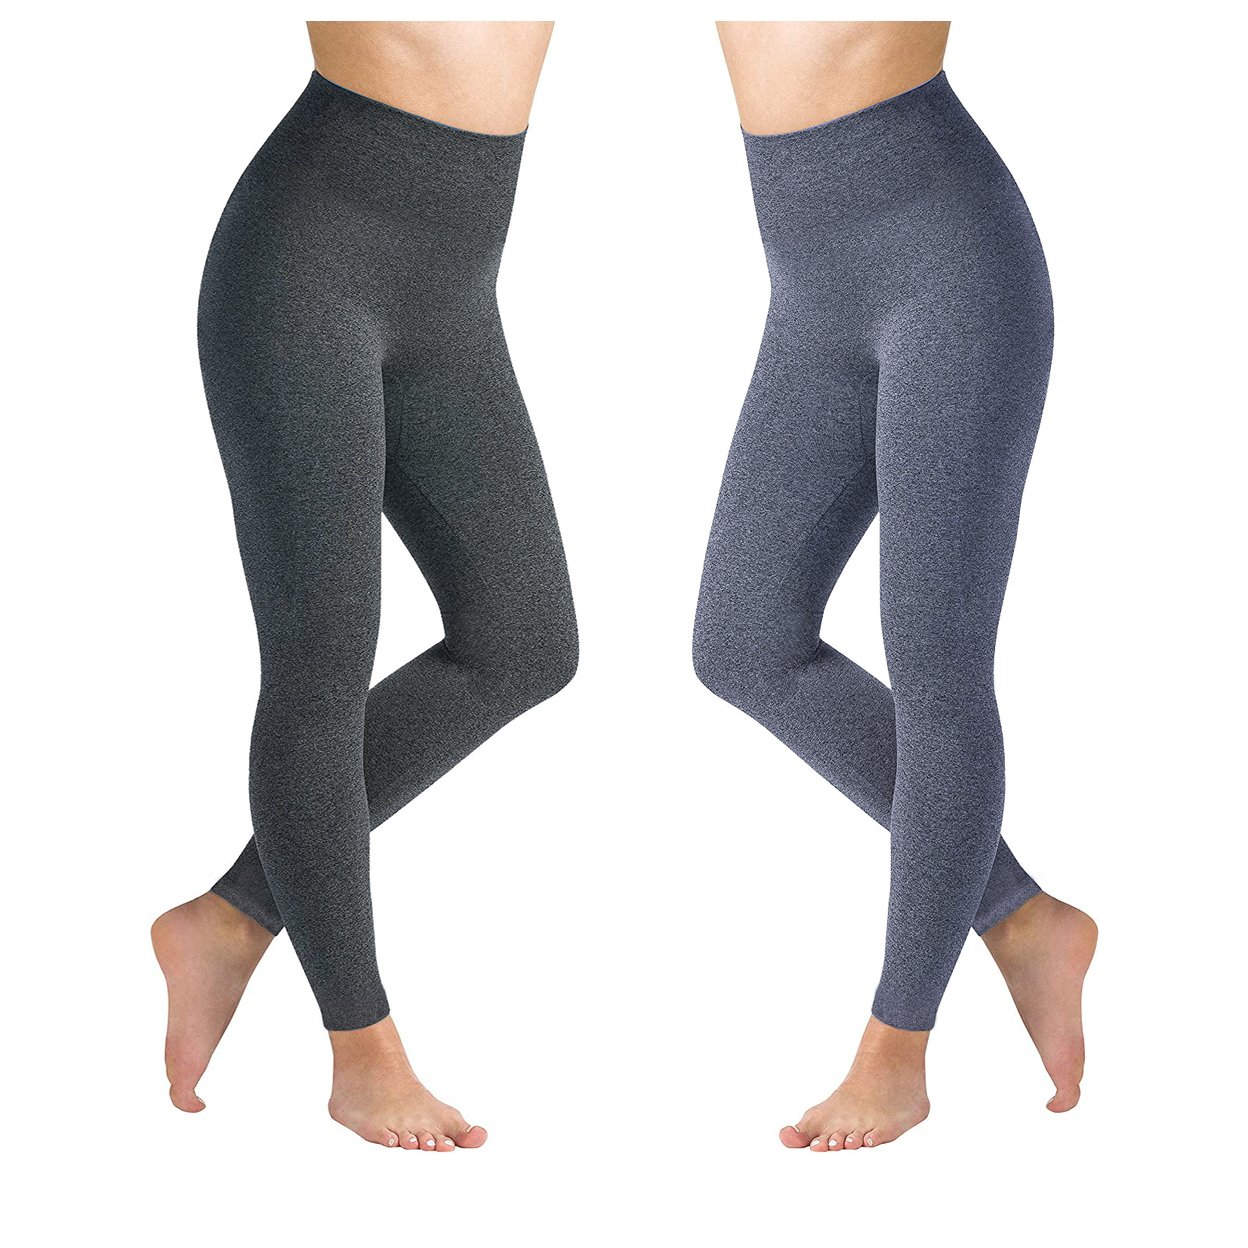 2-Pack: Women's High Waisted Ultra Soft Fleece Lined Warm Marled Leggings(Available In Plus Sizes) - Navy & Navy, Large